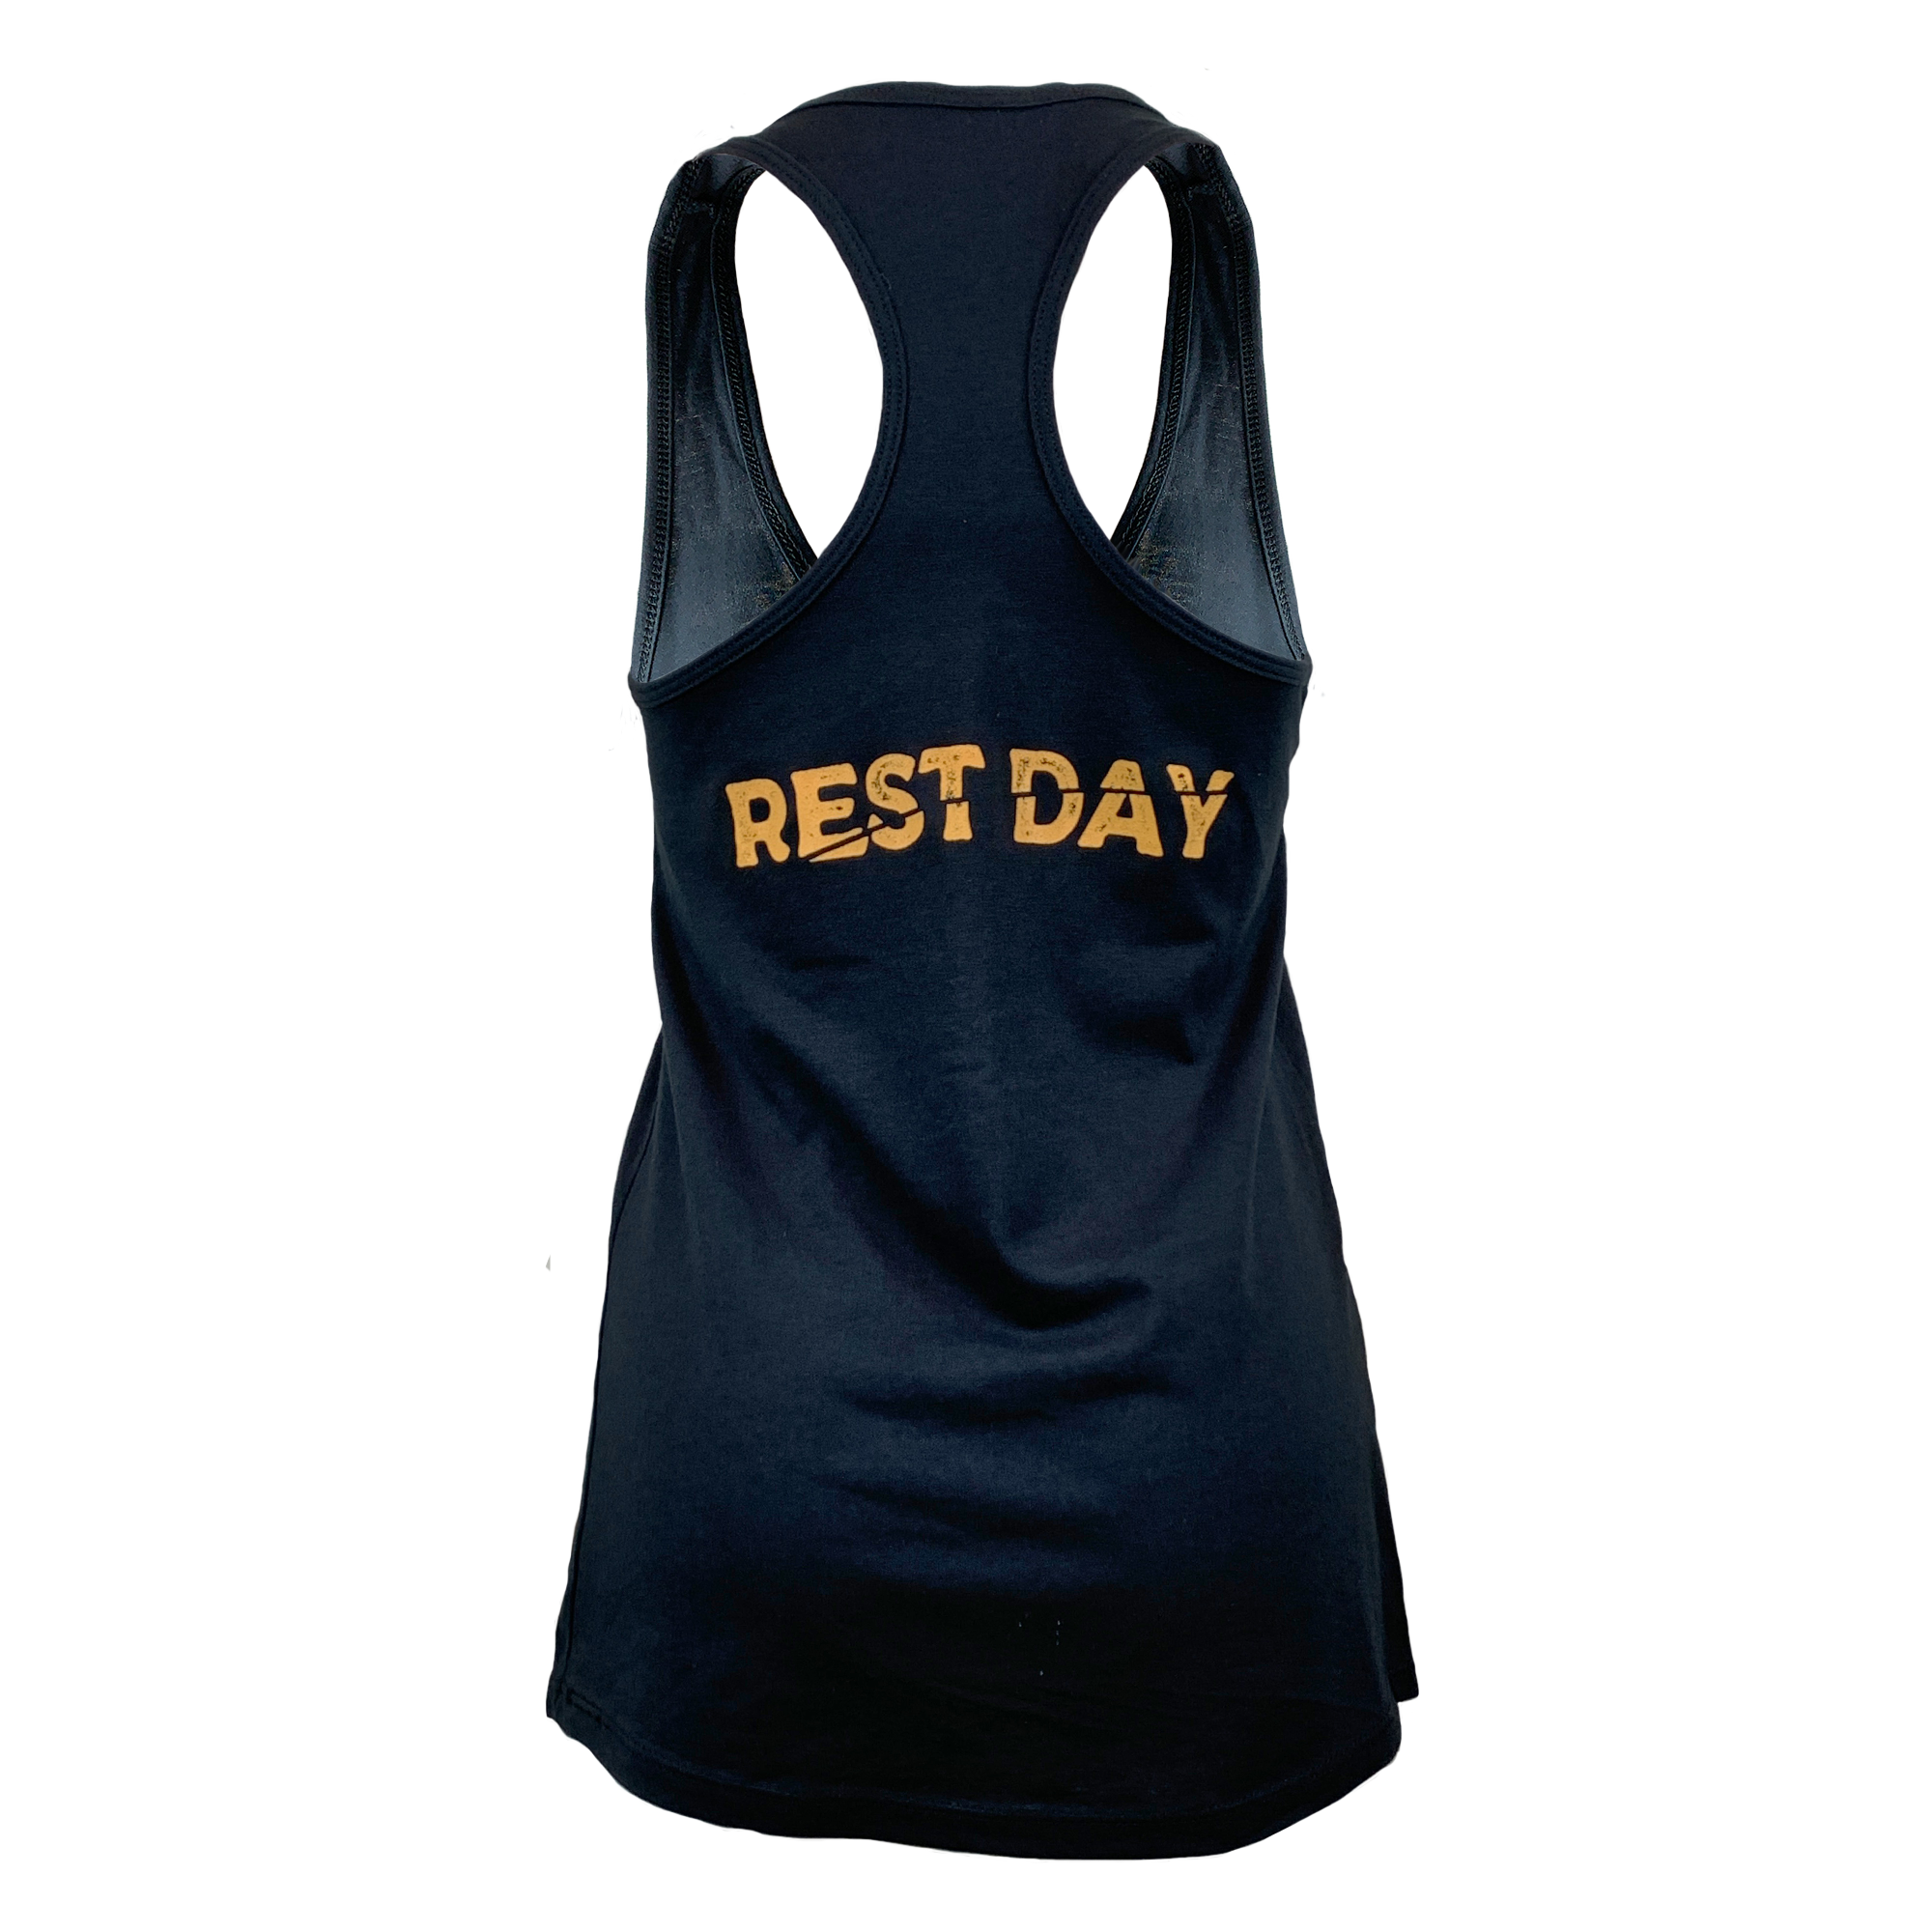 Women's Rest Day Race-Back Tank Top - Black - Savage Barbell Apparel